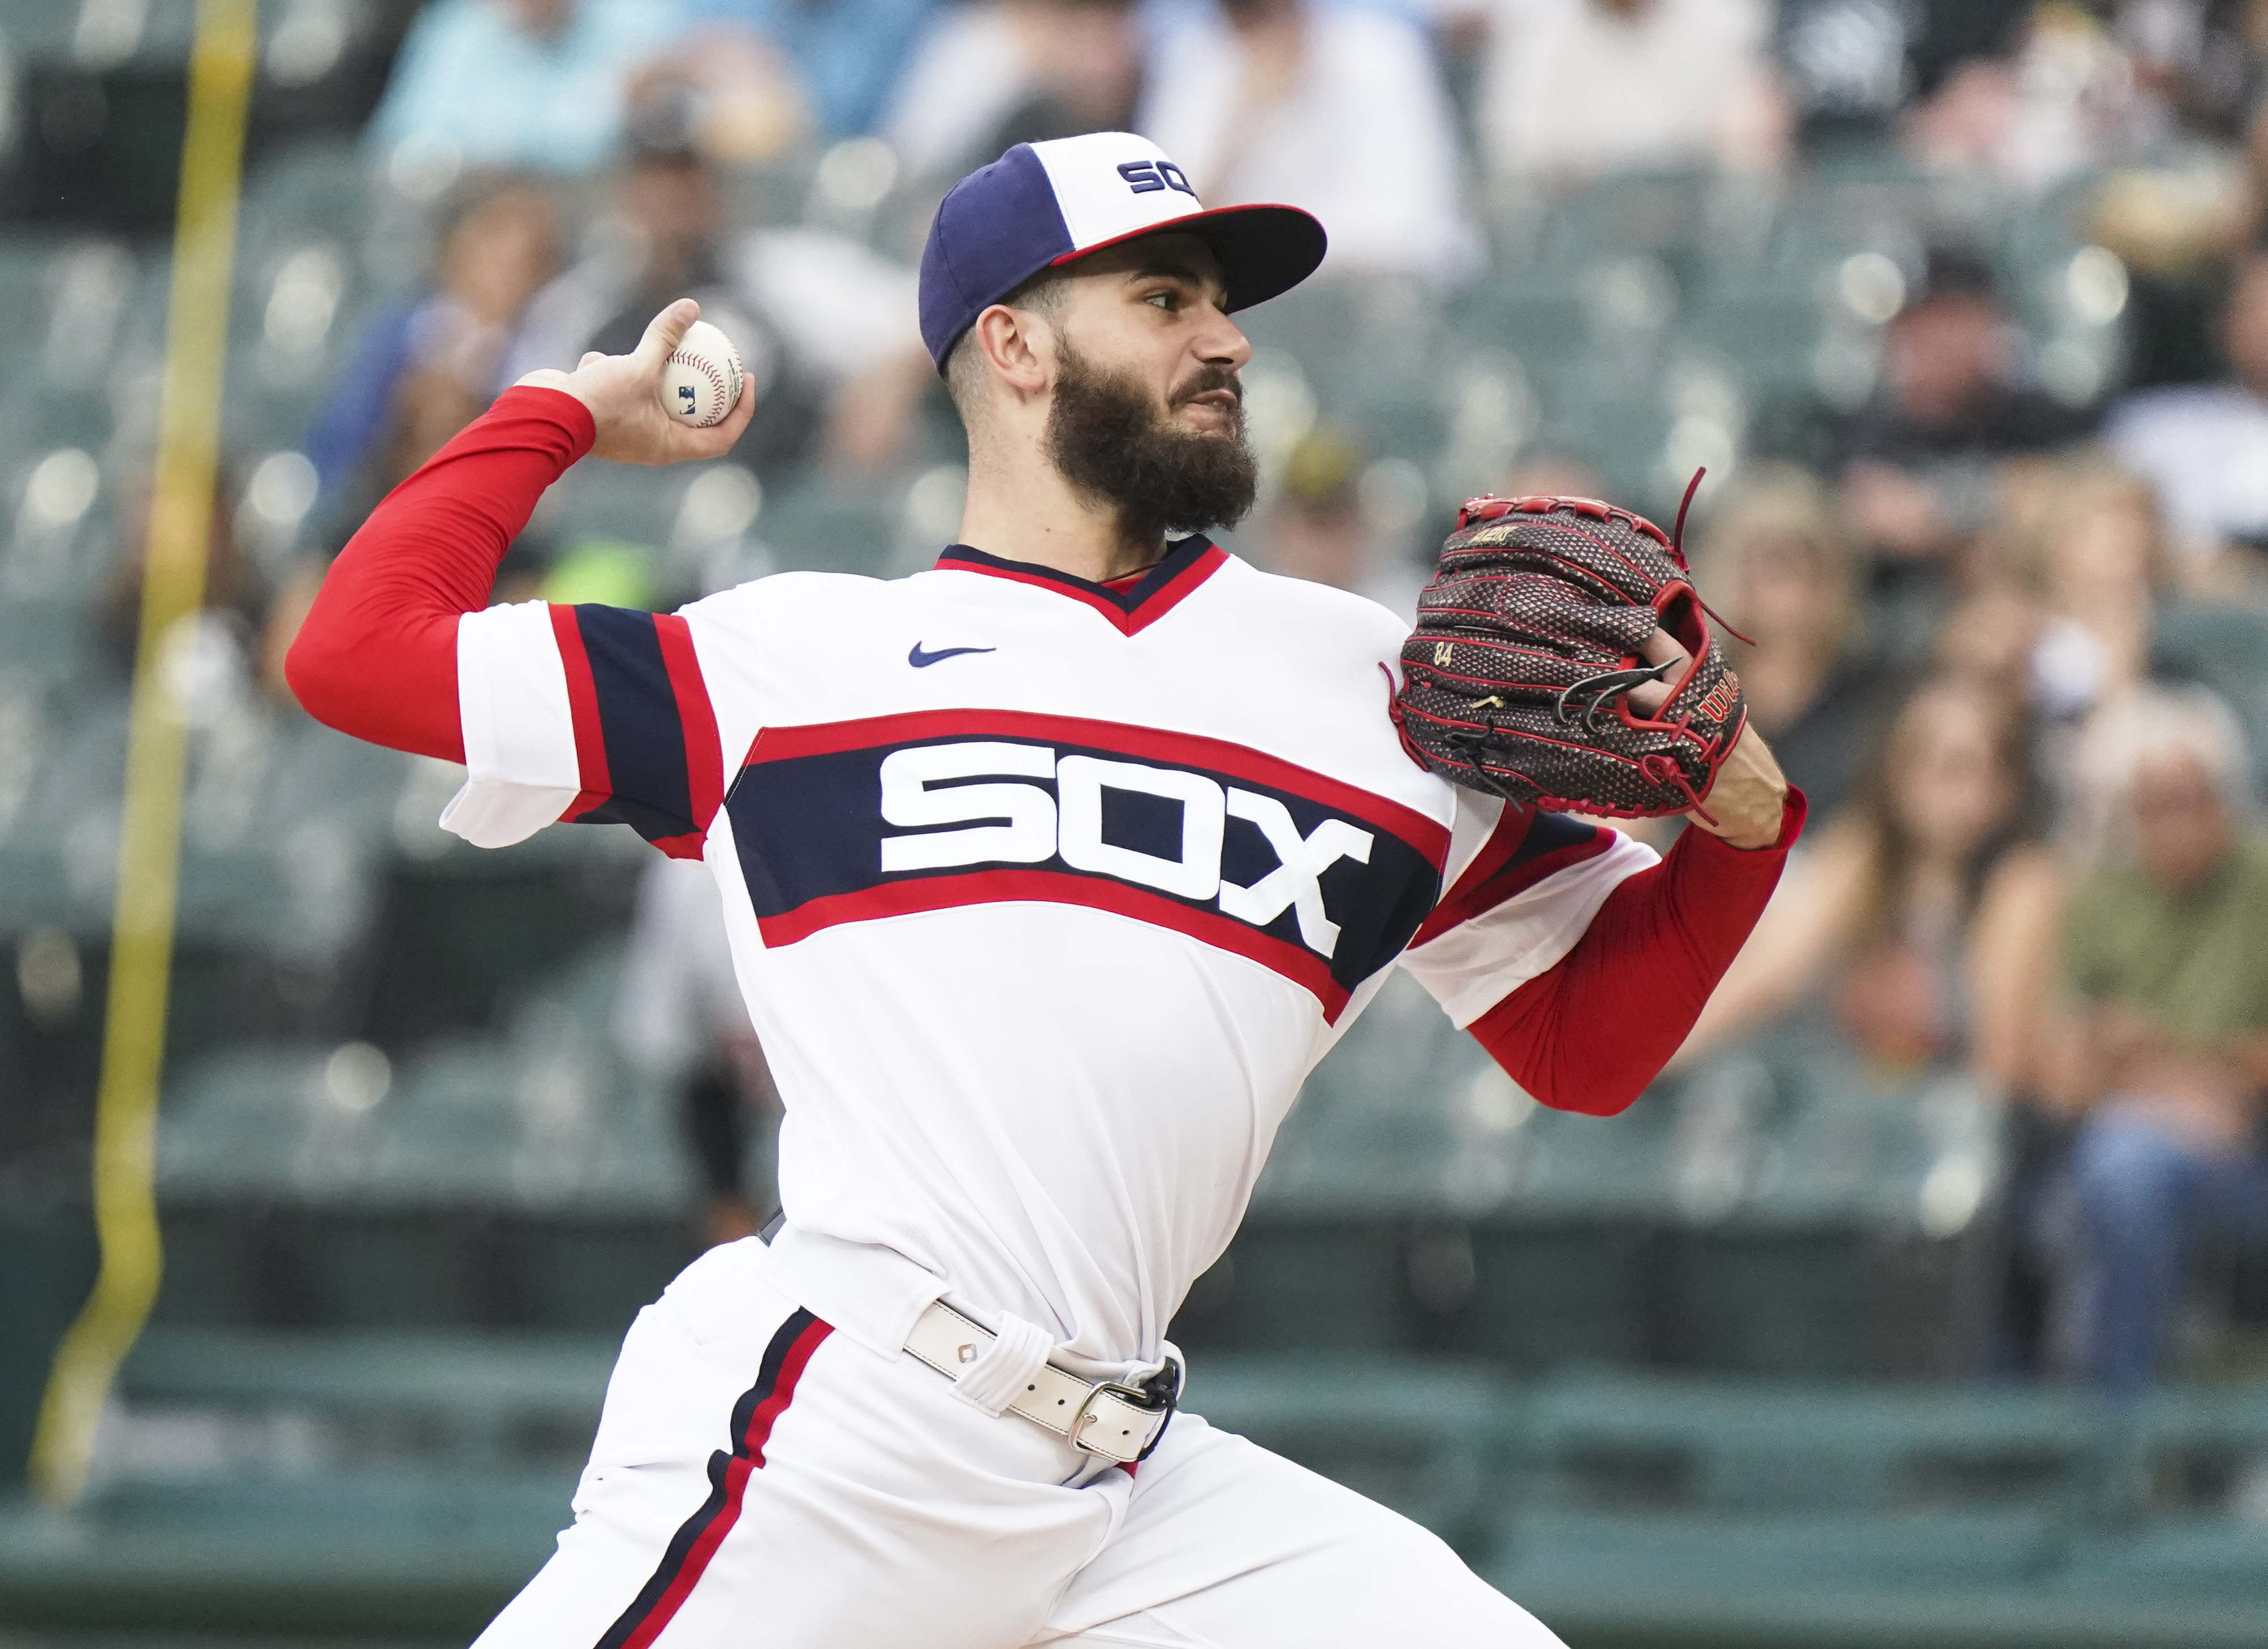 White Sox right-hander Dylan Cease had 226 strikeouts this season, ranking seventh in the majors and second in the American League (Blue Jays’ Robbie Ray, 248).